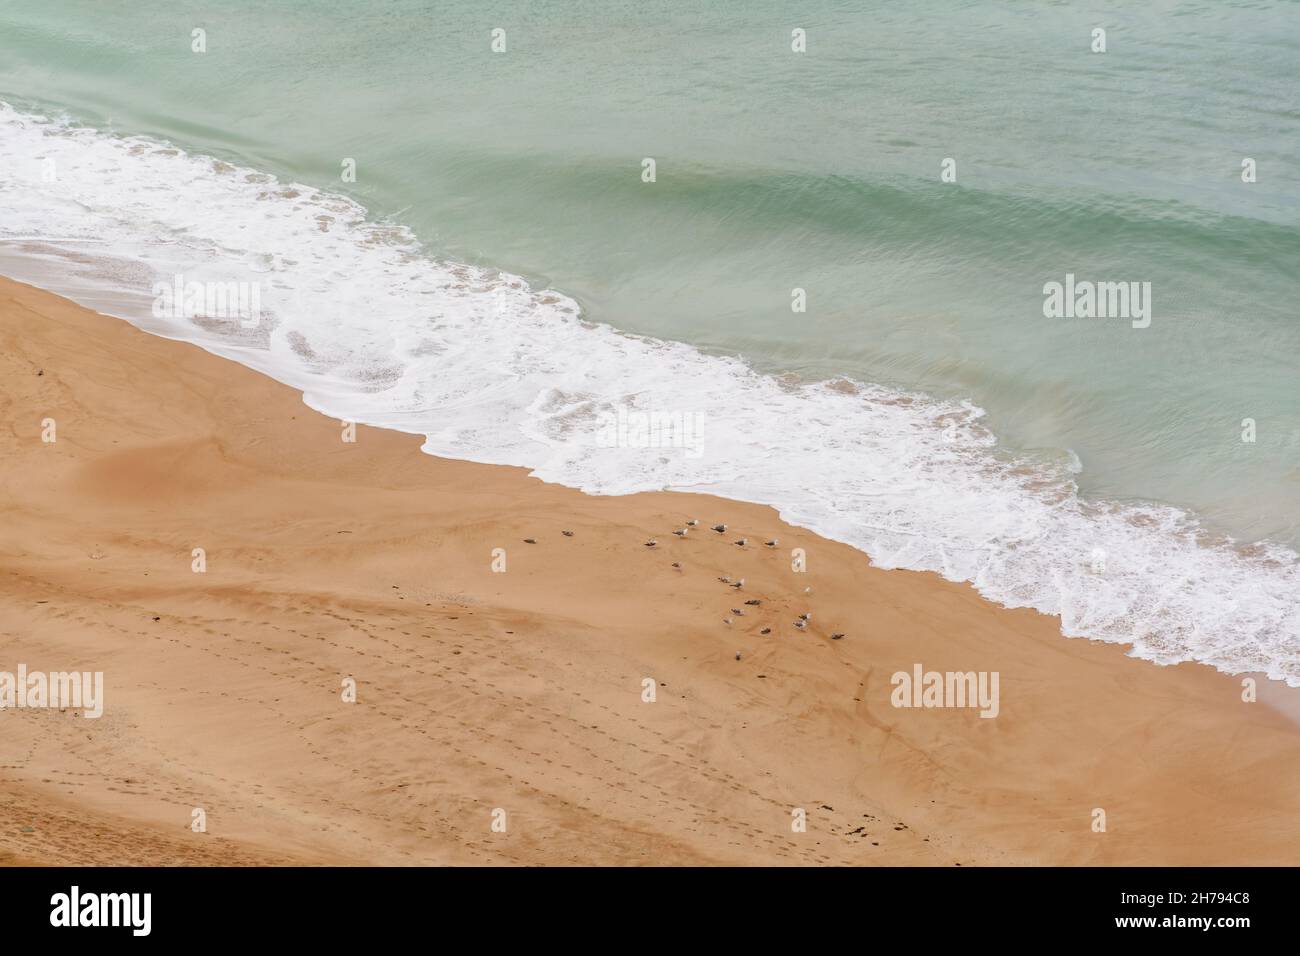 a group of Herons on the gathered on the beach with sea waves in background Stock Photo